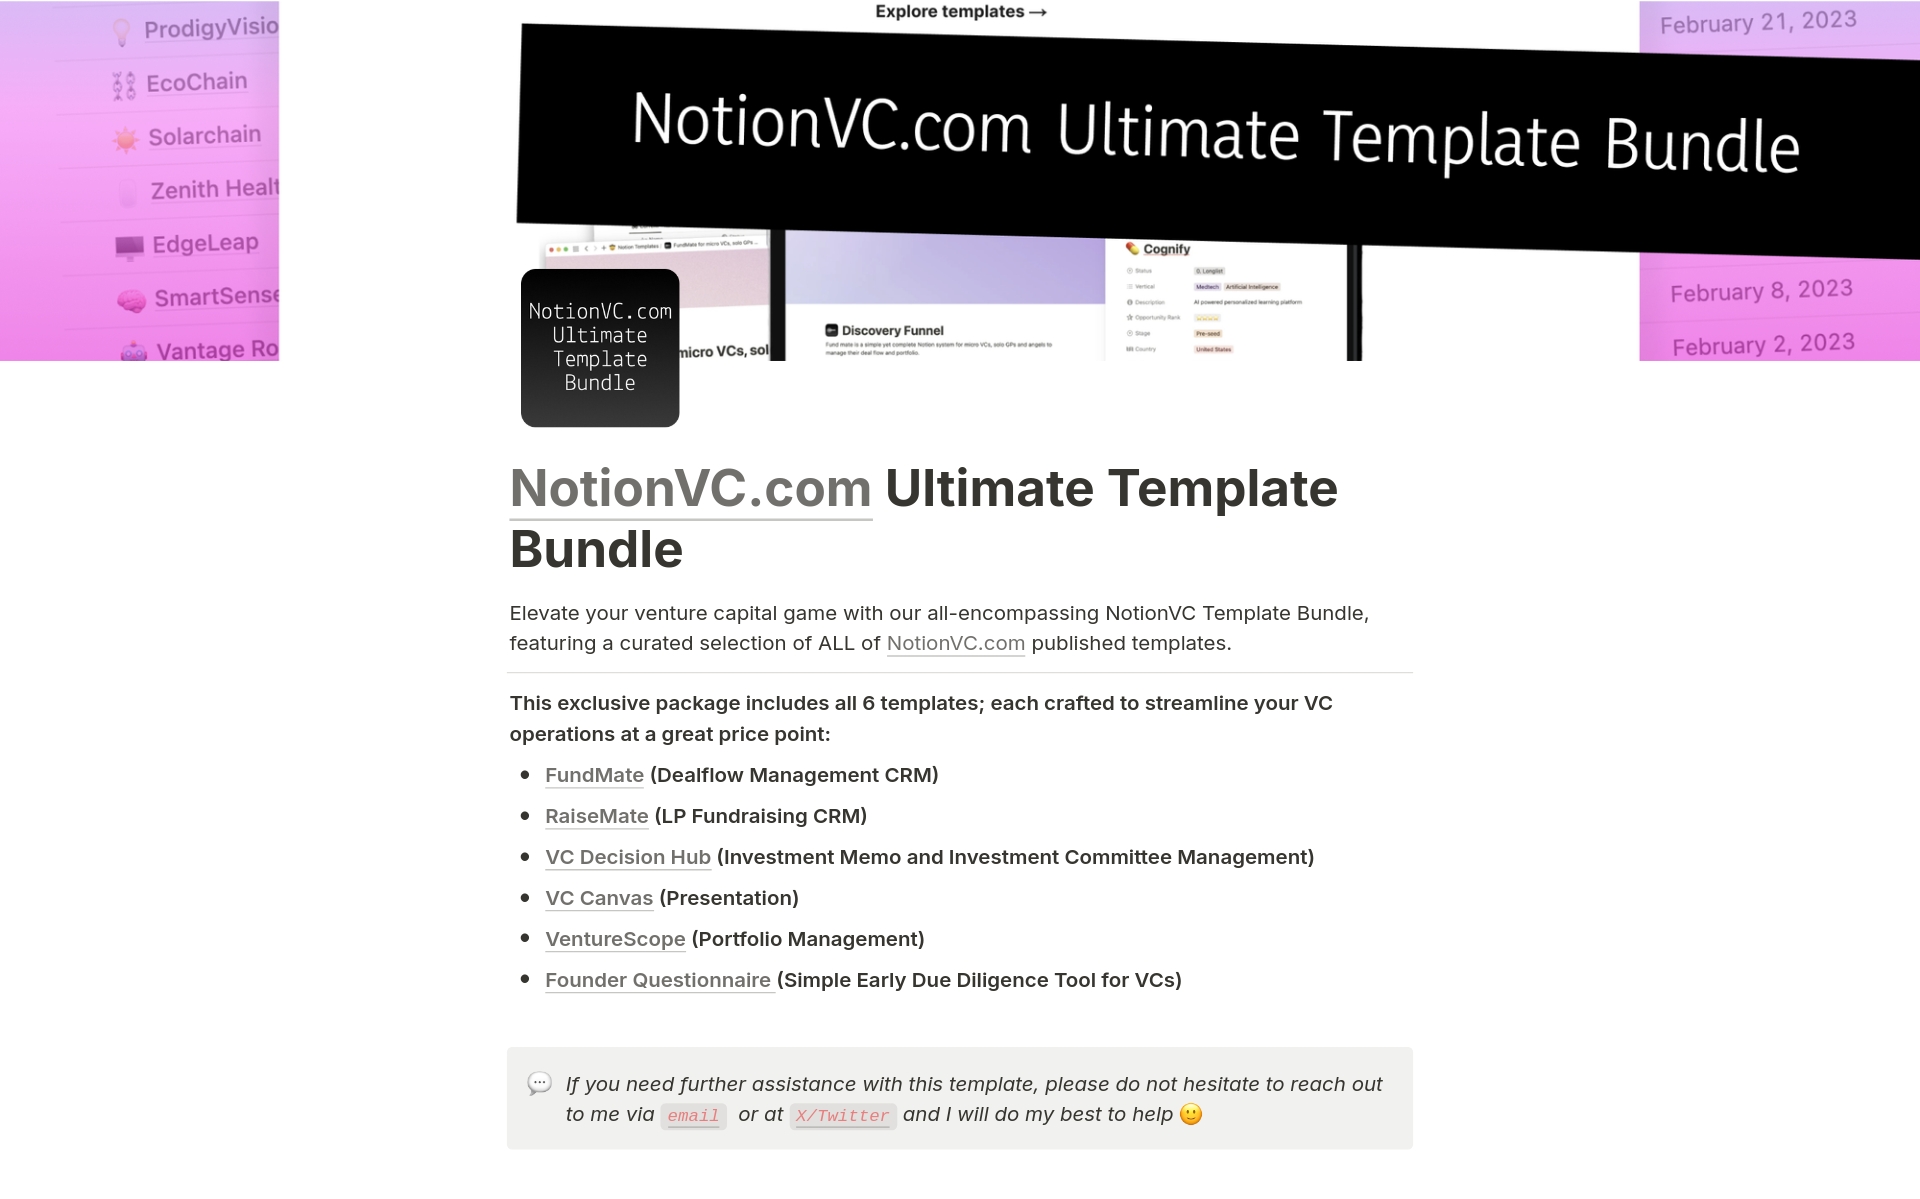 Elevate your venture capital game with our all-encompassing NotionVC Template Bundle which features templates covering all aspects of running a VC practice.